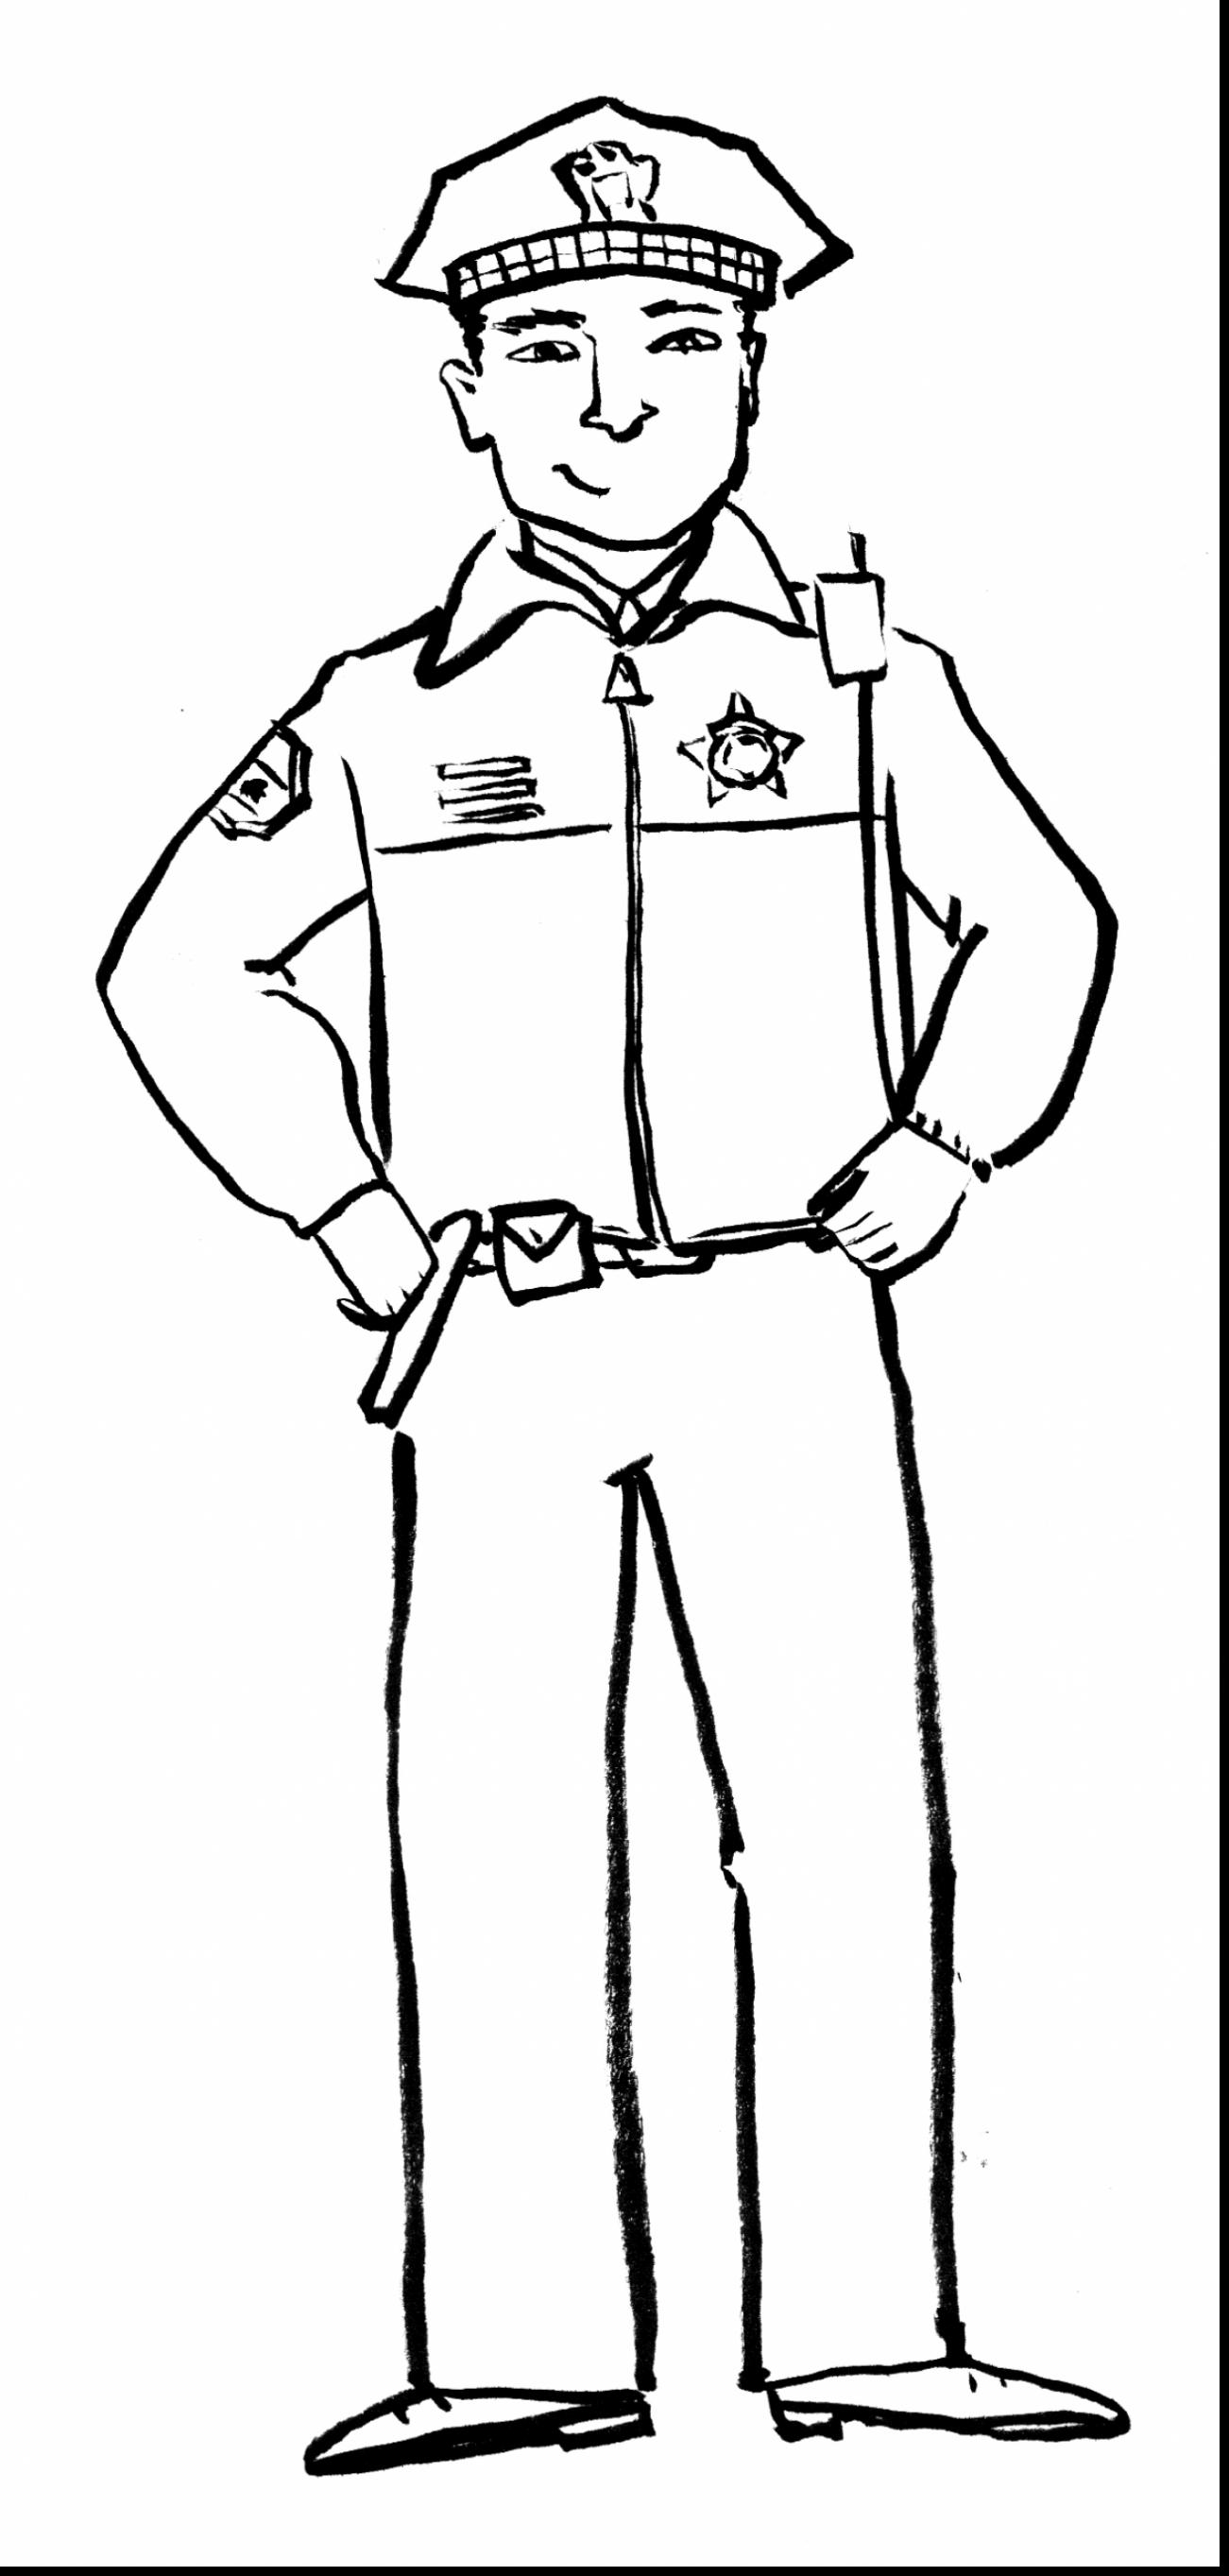 Police officer fantastic police stationloring pages with officer clip art